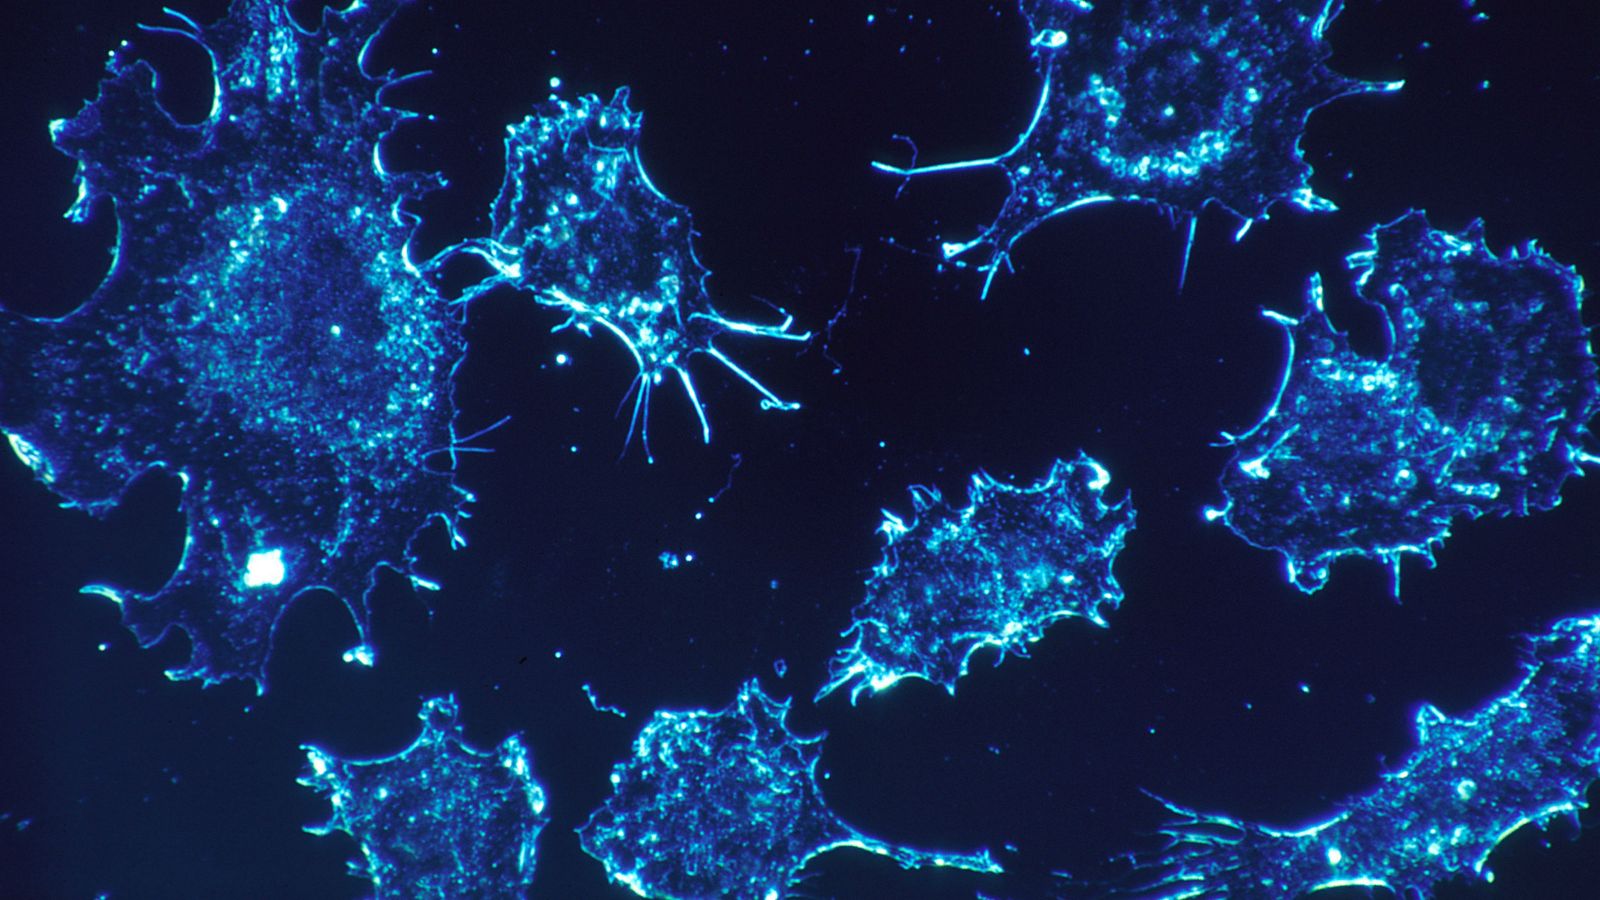 Cancer cells under microscope under a sort of blue light.